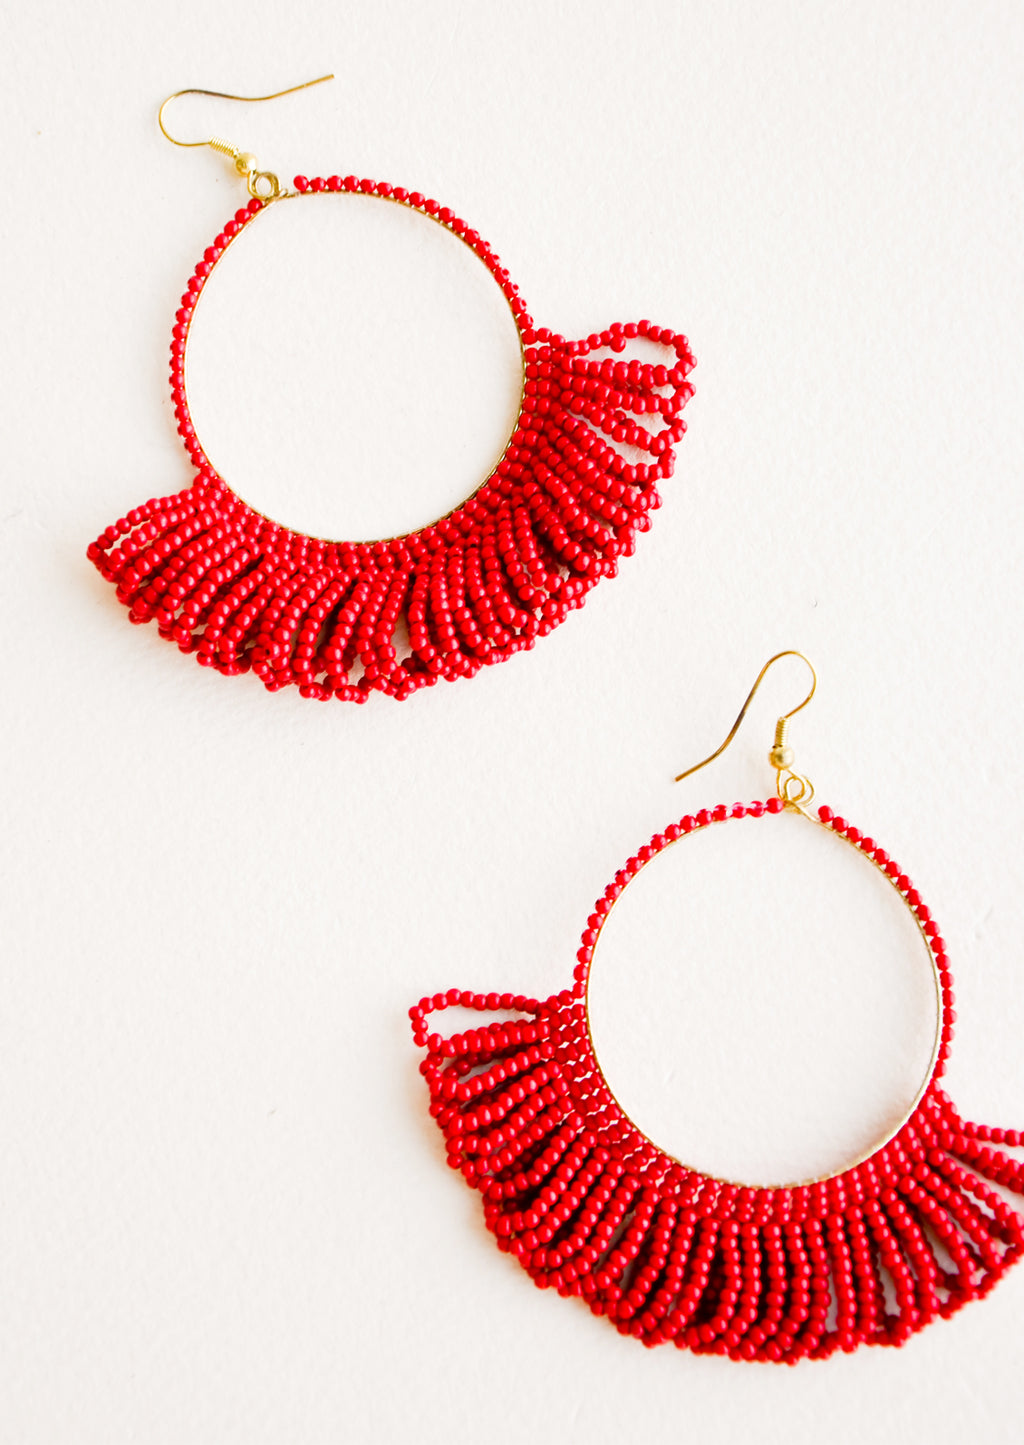 Cherry: Dangling hoop earrings featuring bright red beads and accented with hanging beaded, looped fringe.